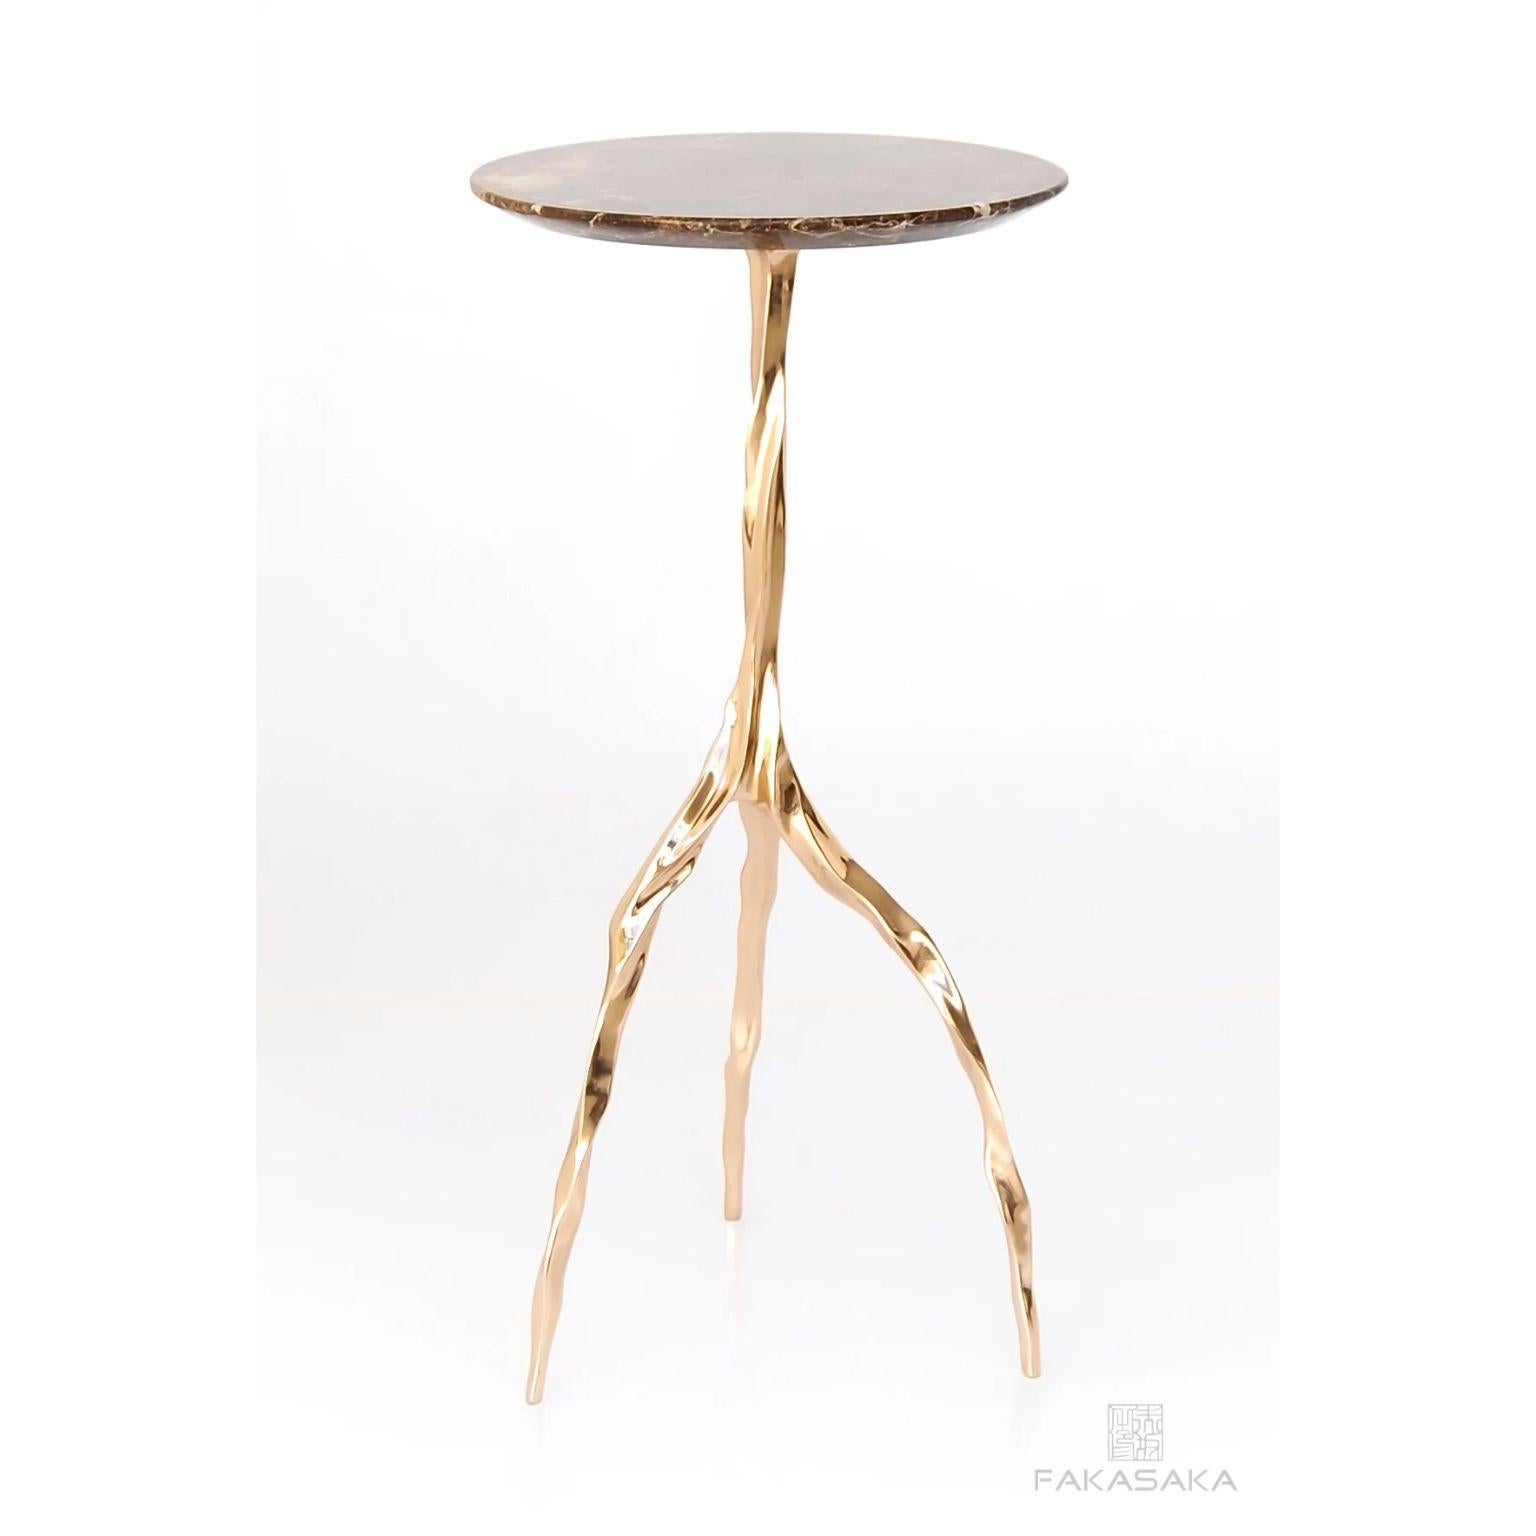 Nina drink table with Marrom Imperial marble top by Fakasaka Design
Dimensions: W 30 cm, D 30 cm, H 62 cm.
Materials: polished bronze base, Marron Imperial Marble top.
 
Also available in different table top materials:
Nero Marquina Marble